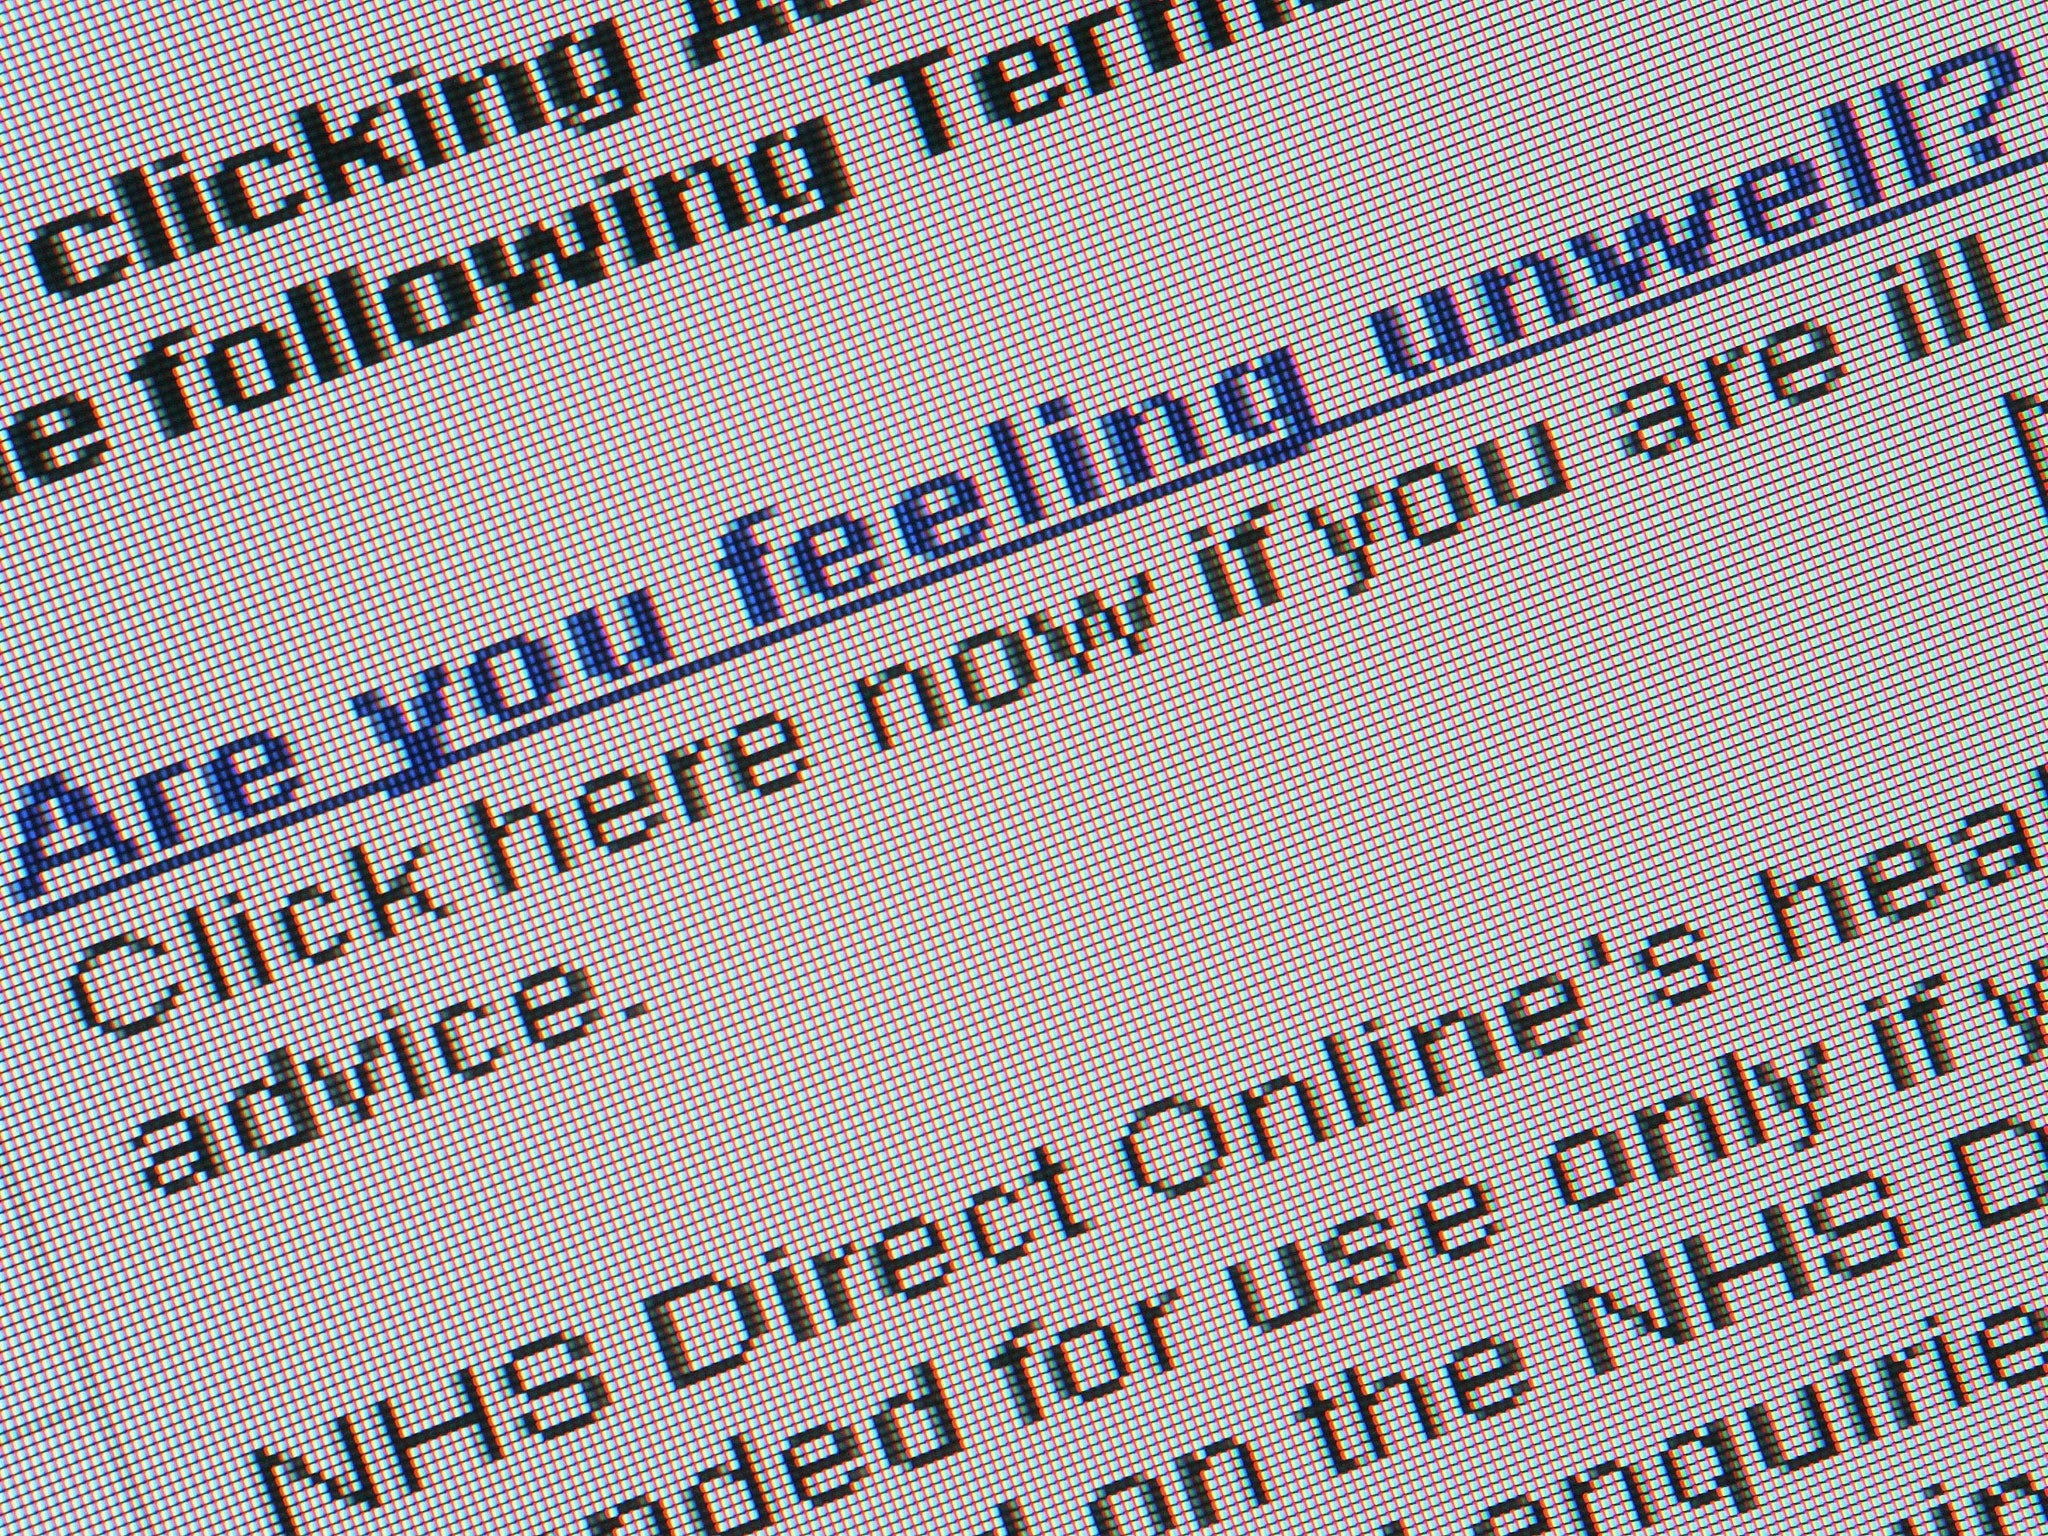 Patients accessing the site were sent adverts and malware